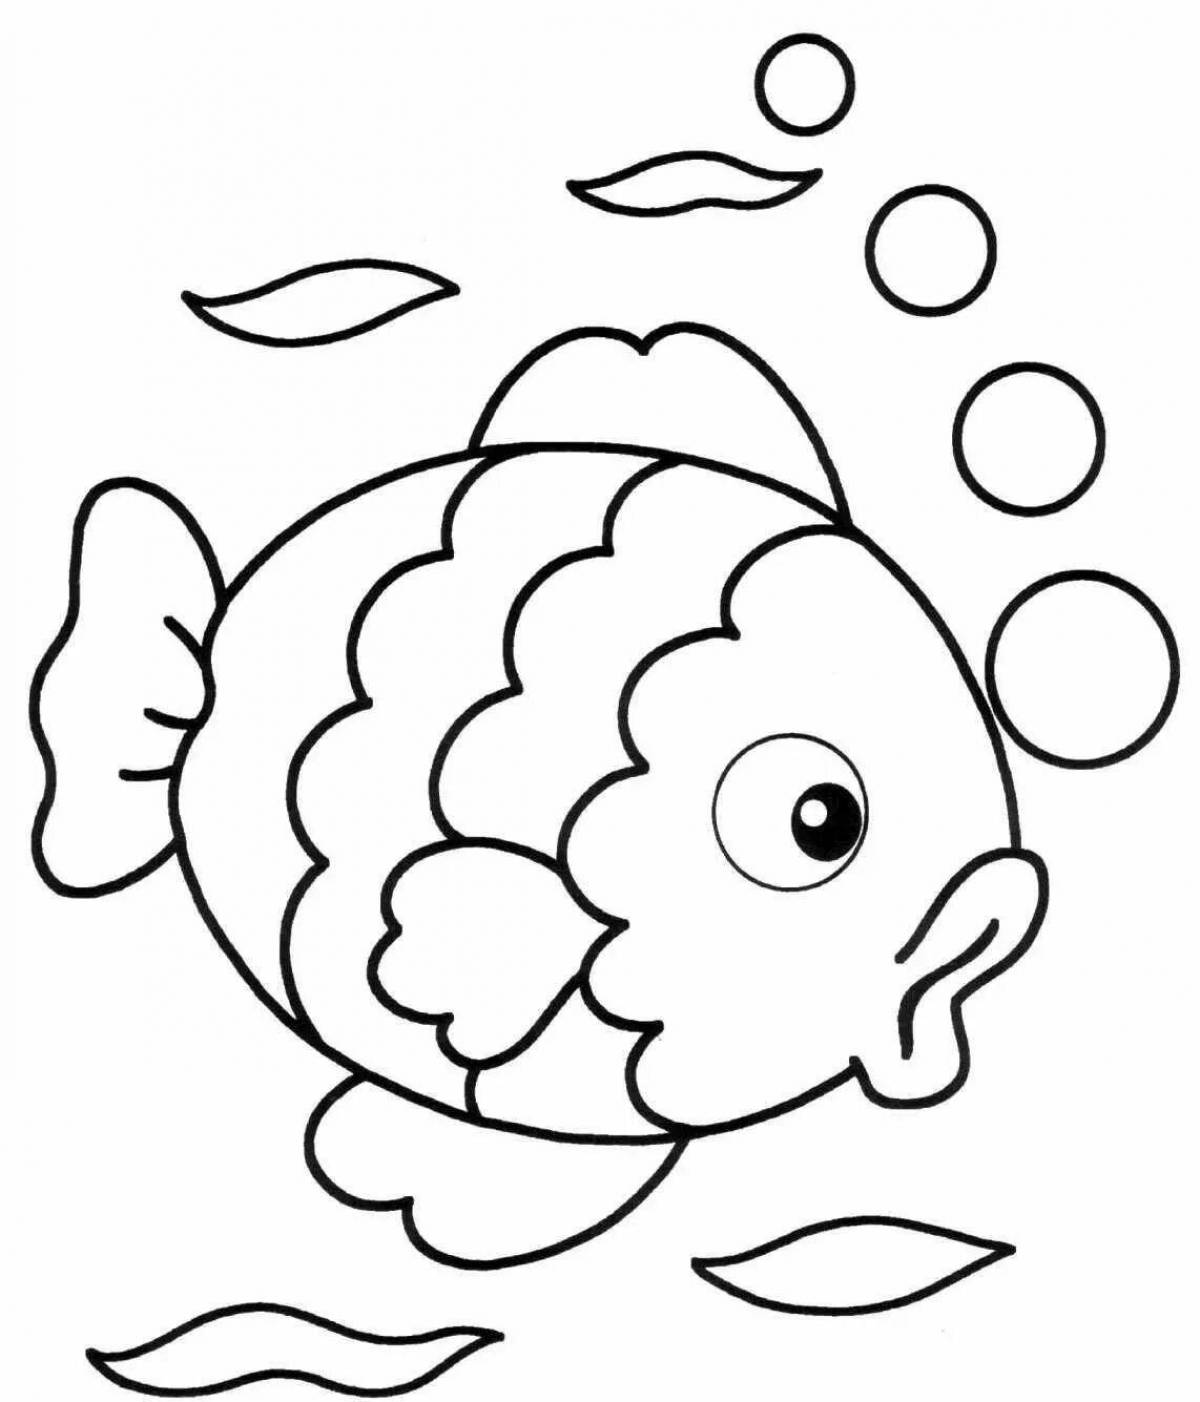 Coloring template for 2 year olds